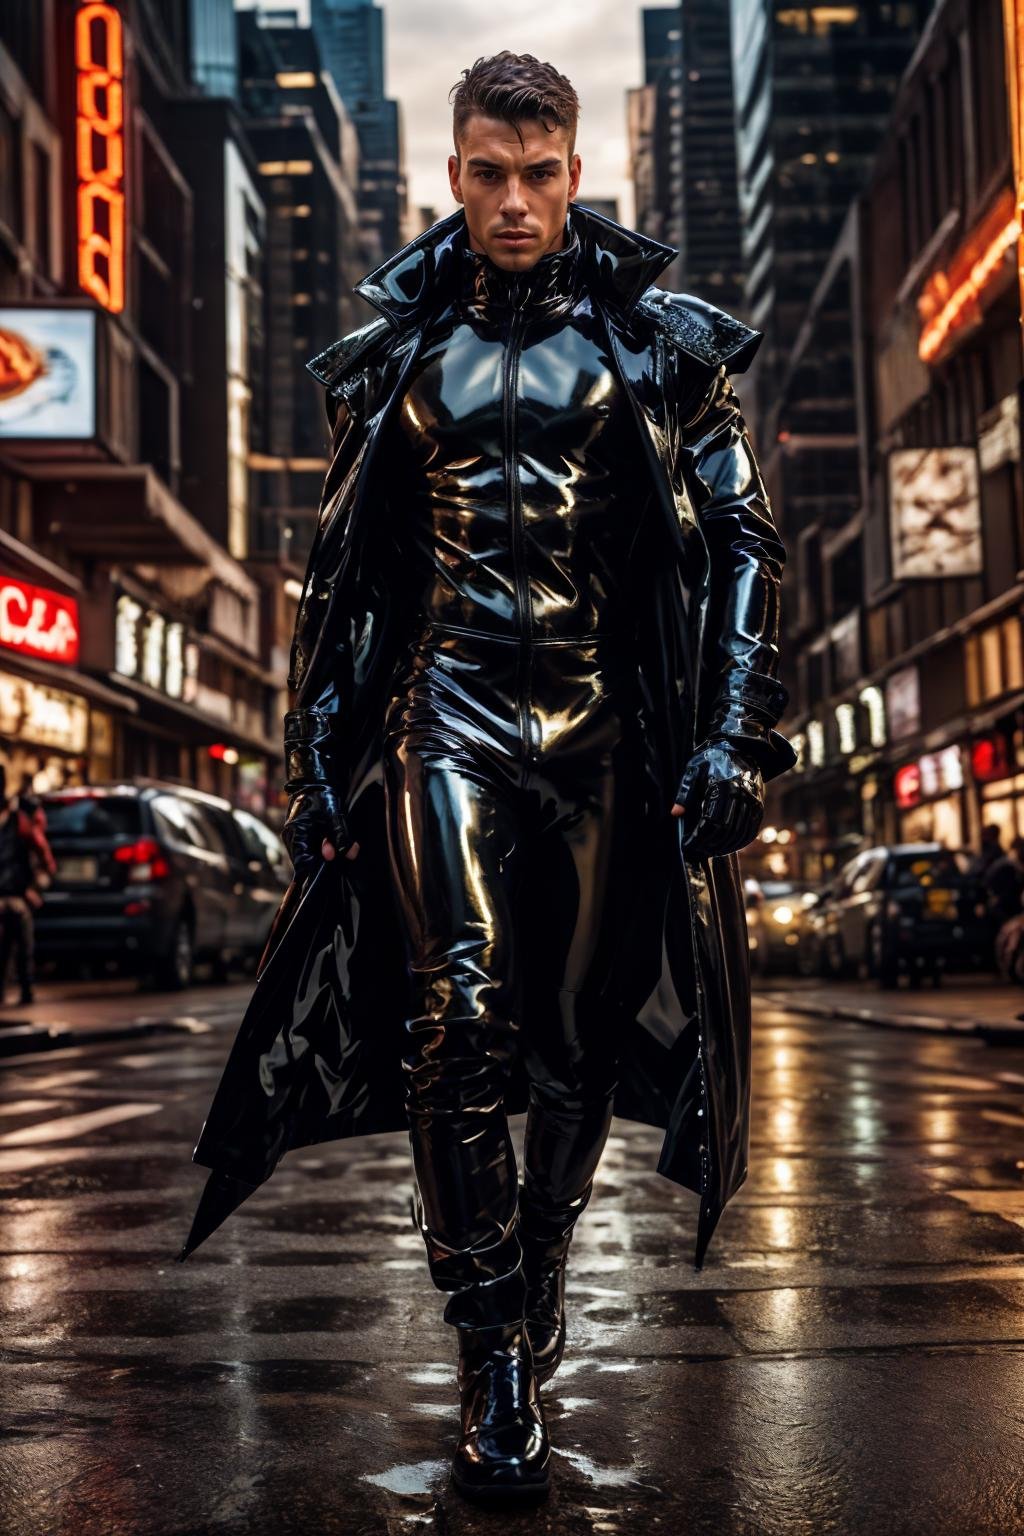 realistic, masterpiece, intricate details, detailed background, depth of field, muscular, photo of a handsome (australian man), l4tex4rmor, wearing latex coat, shiny latex, fighting stance, dynamic pose, futuristic city street, walking,